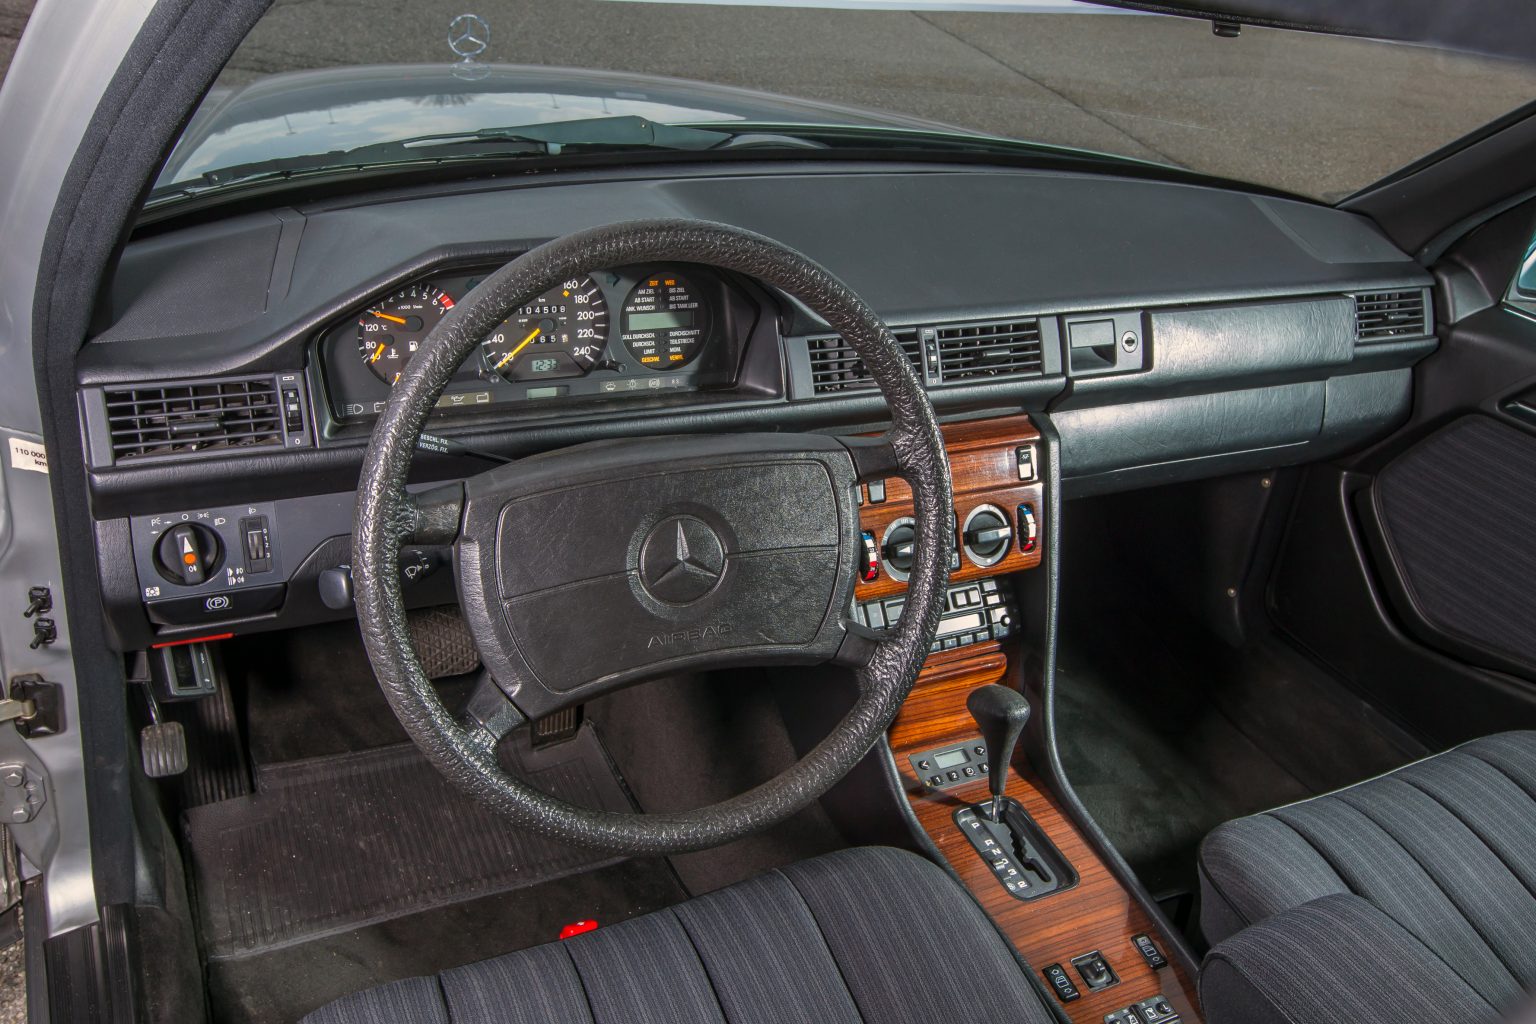 Mercedes-Benz 300 E W124 Saloon Cockpit. Photo from the Mercedes-Benz Classic Insight “History of the E-Class” from 19 to 22 April 2016.